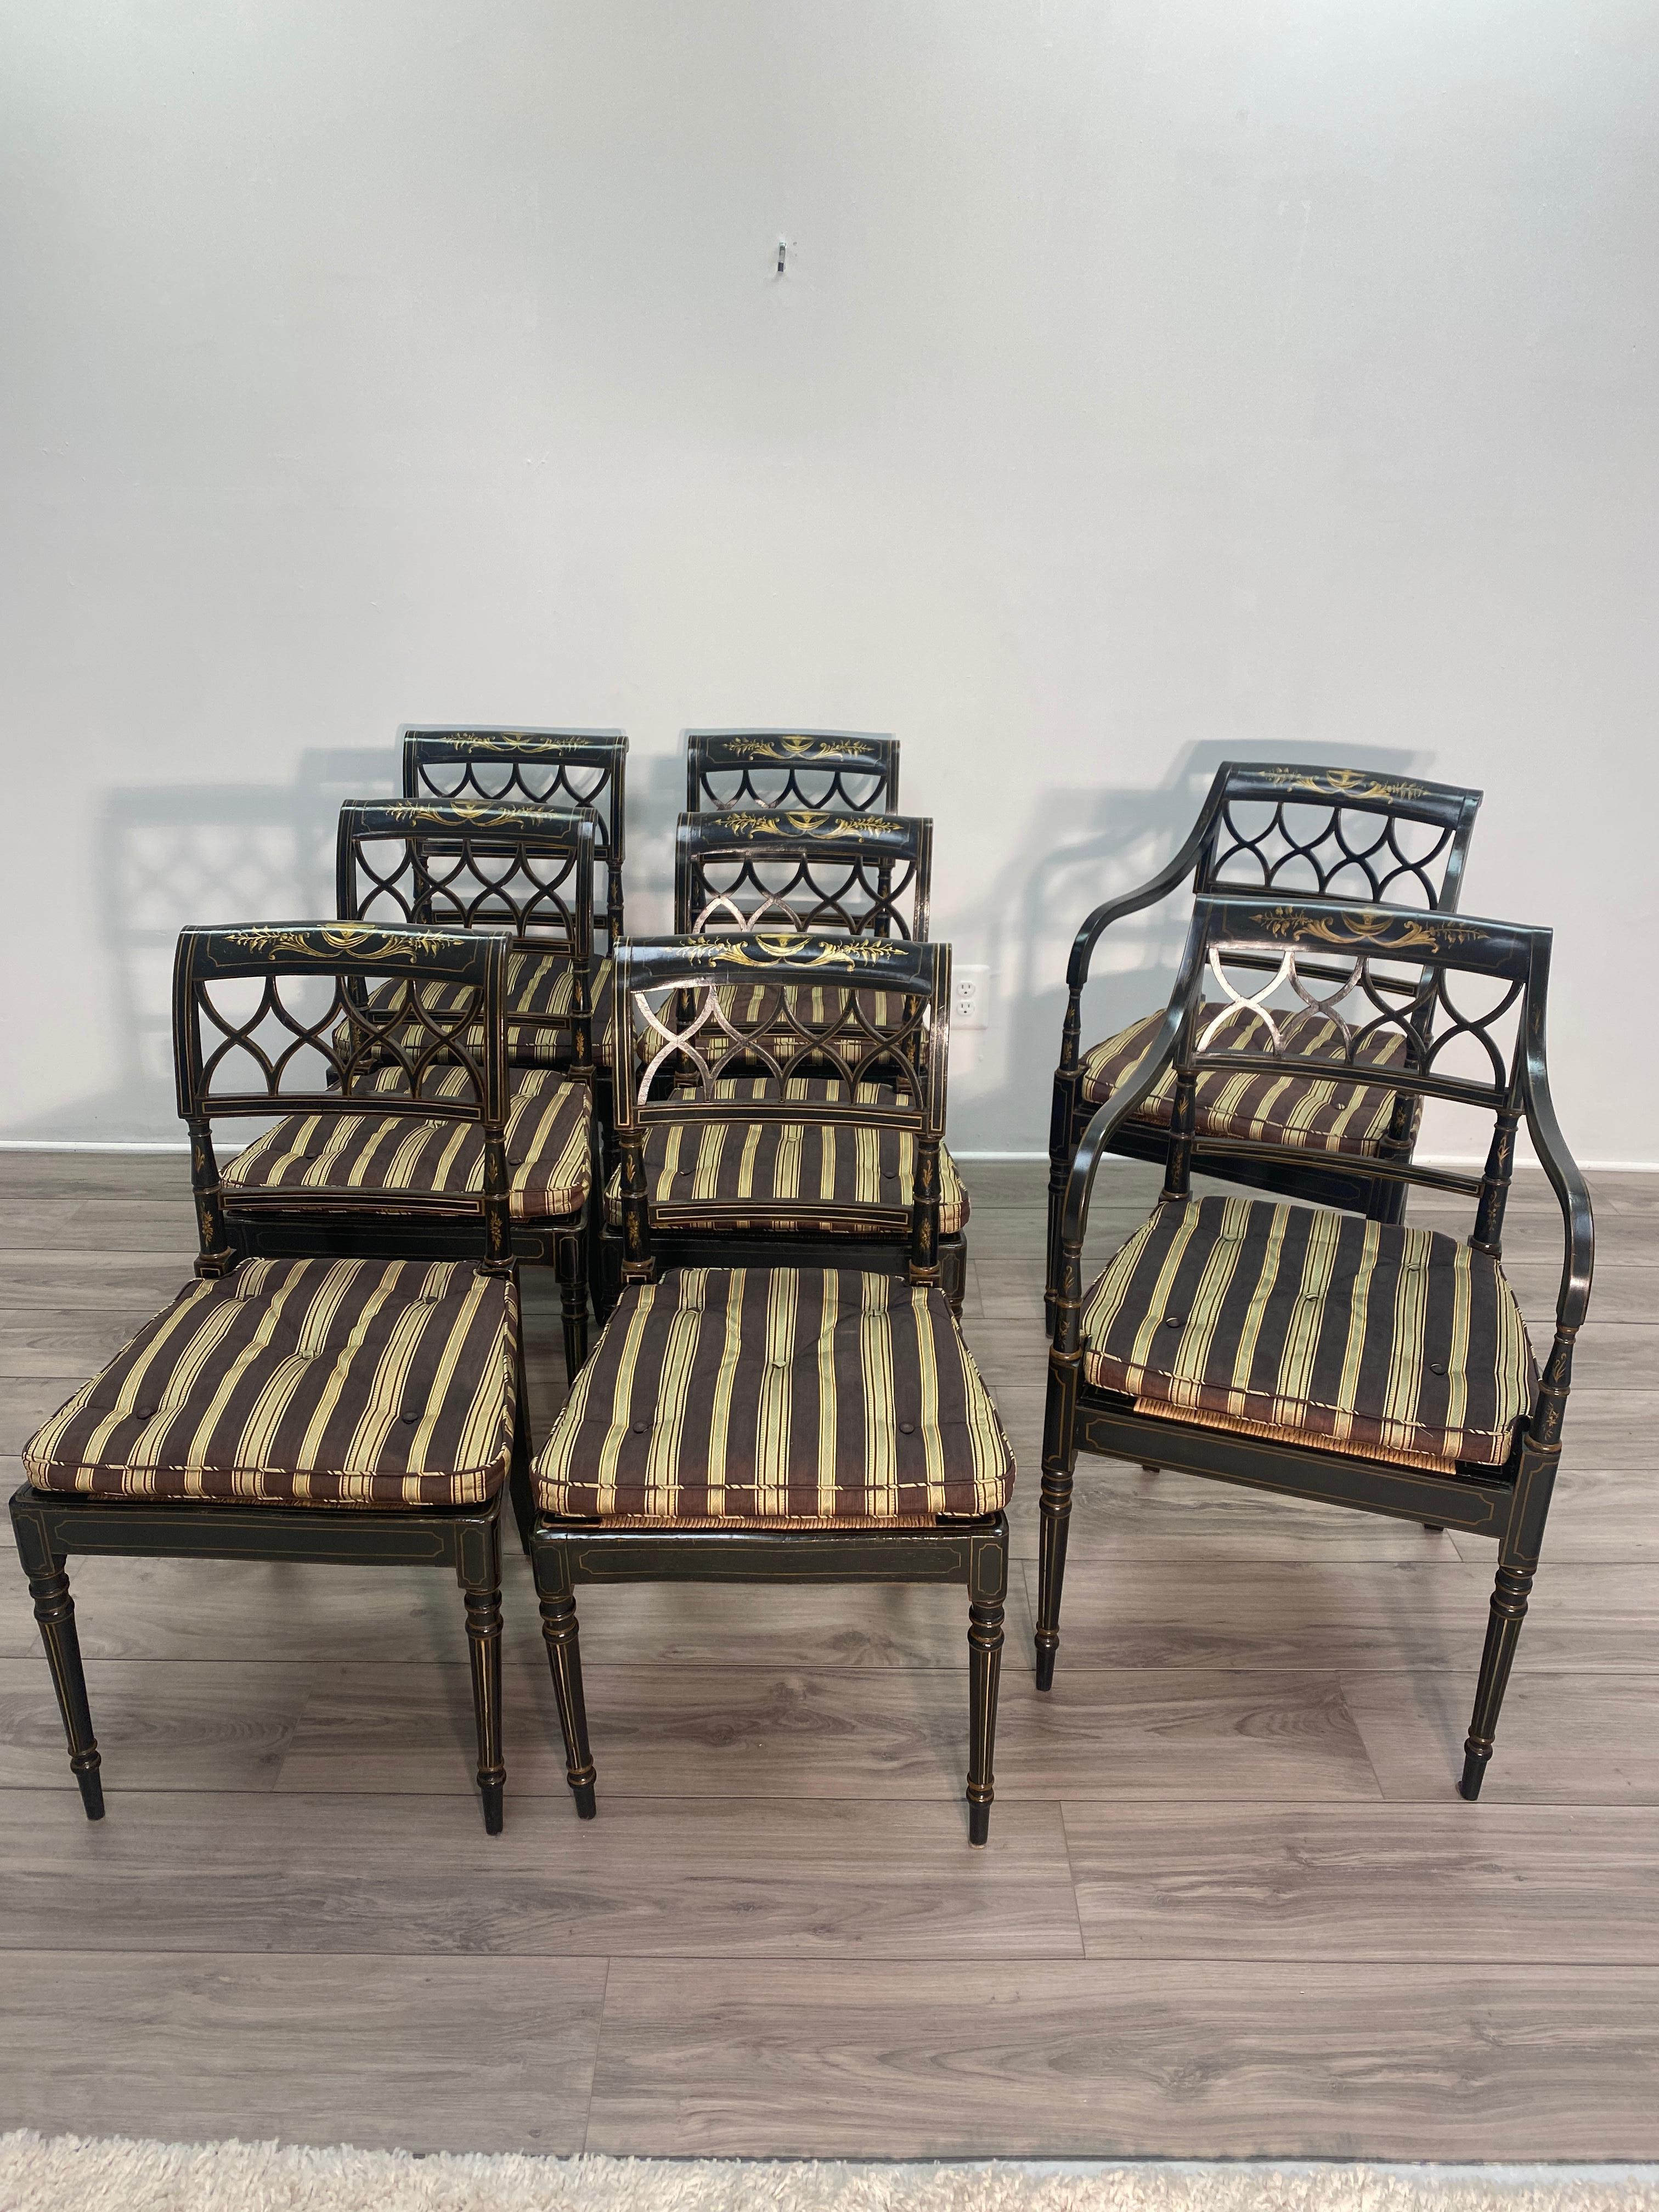 A remarkable elegant and rare set of ebonized and hand applied parcel-gilt Period English Regency chairs with rush seats and cushions.